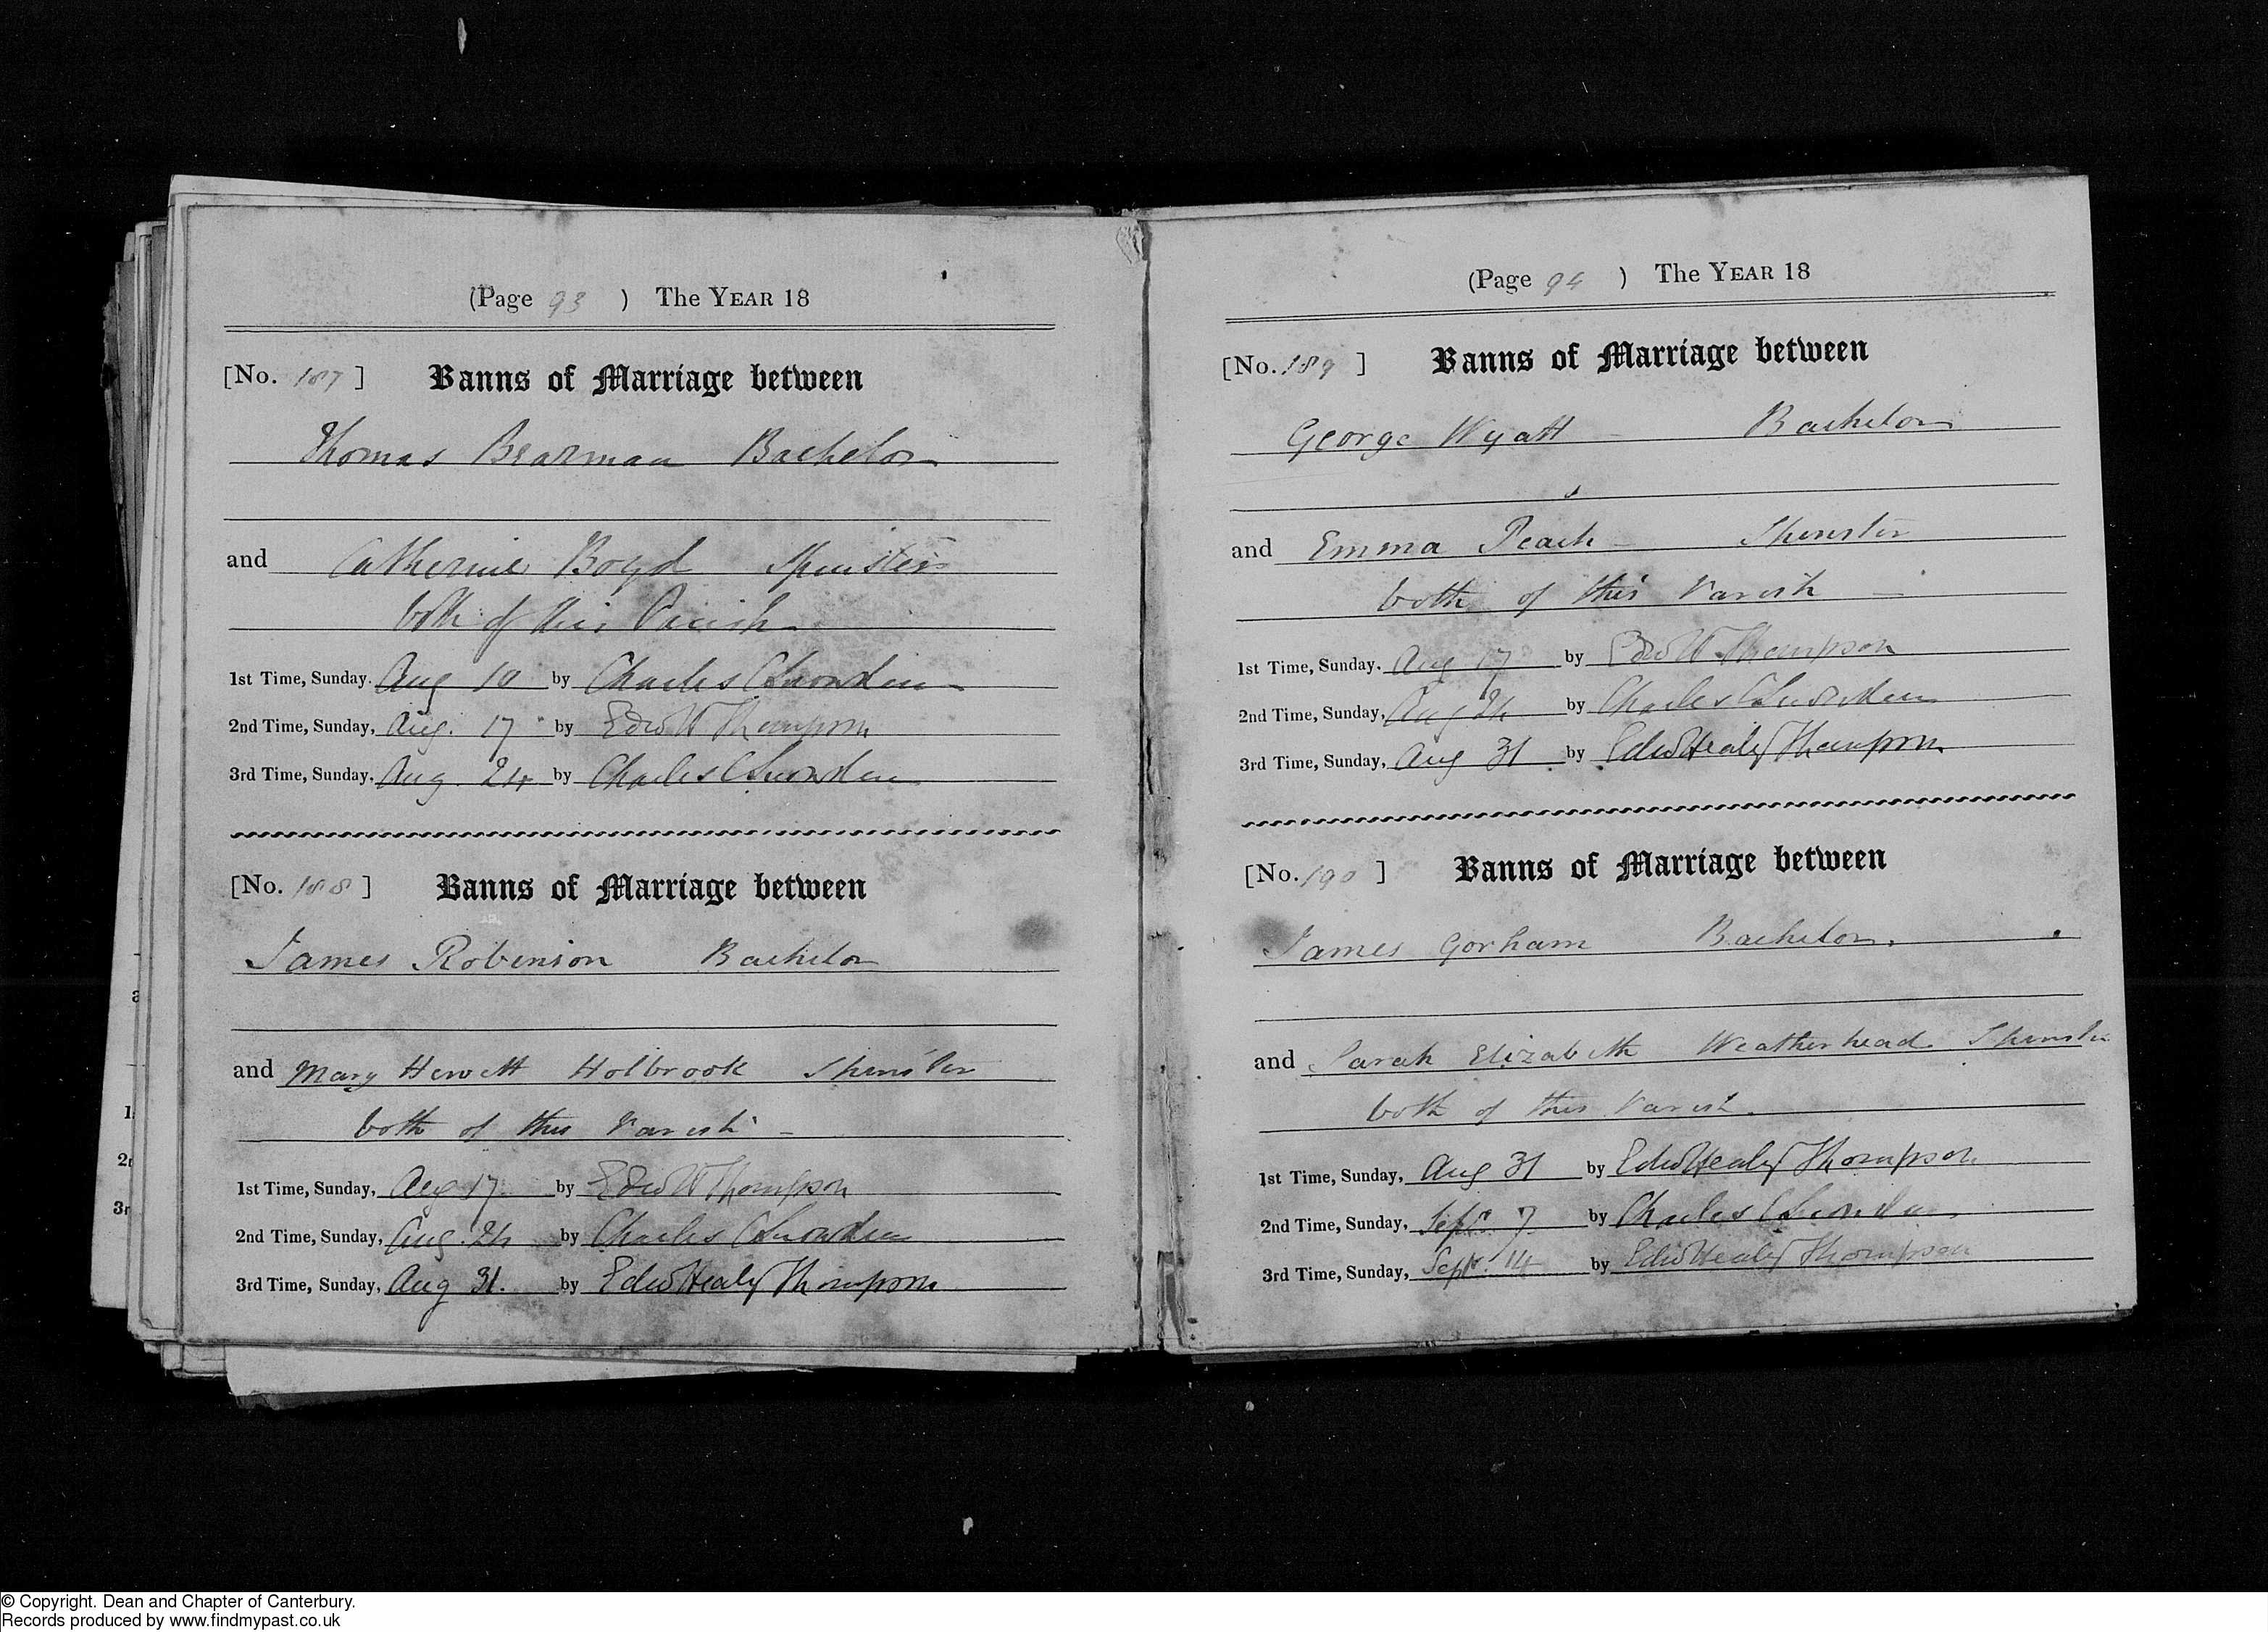 Record of the marriage banns of Thomas Bearman and Catherine Boyd in 1845